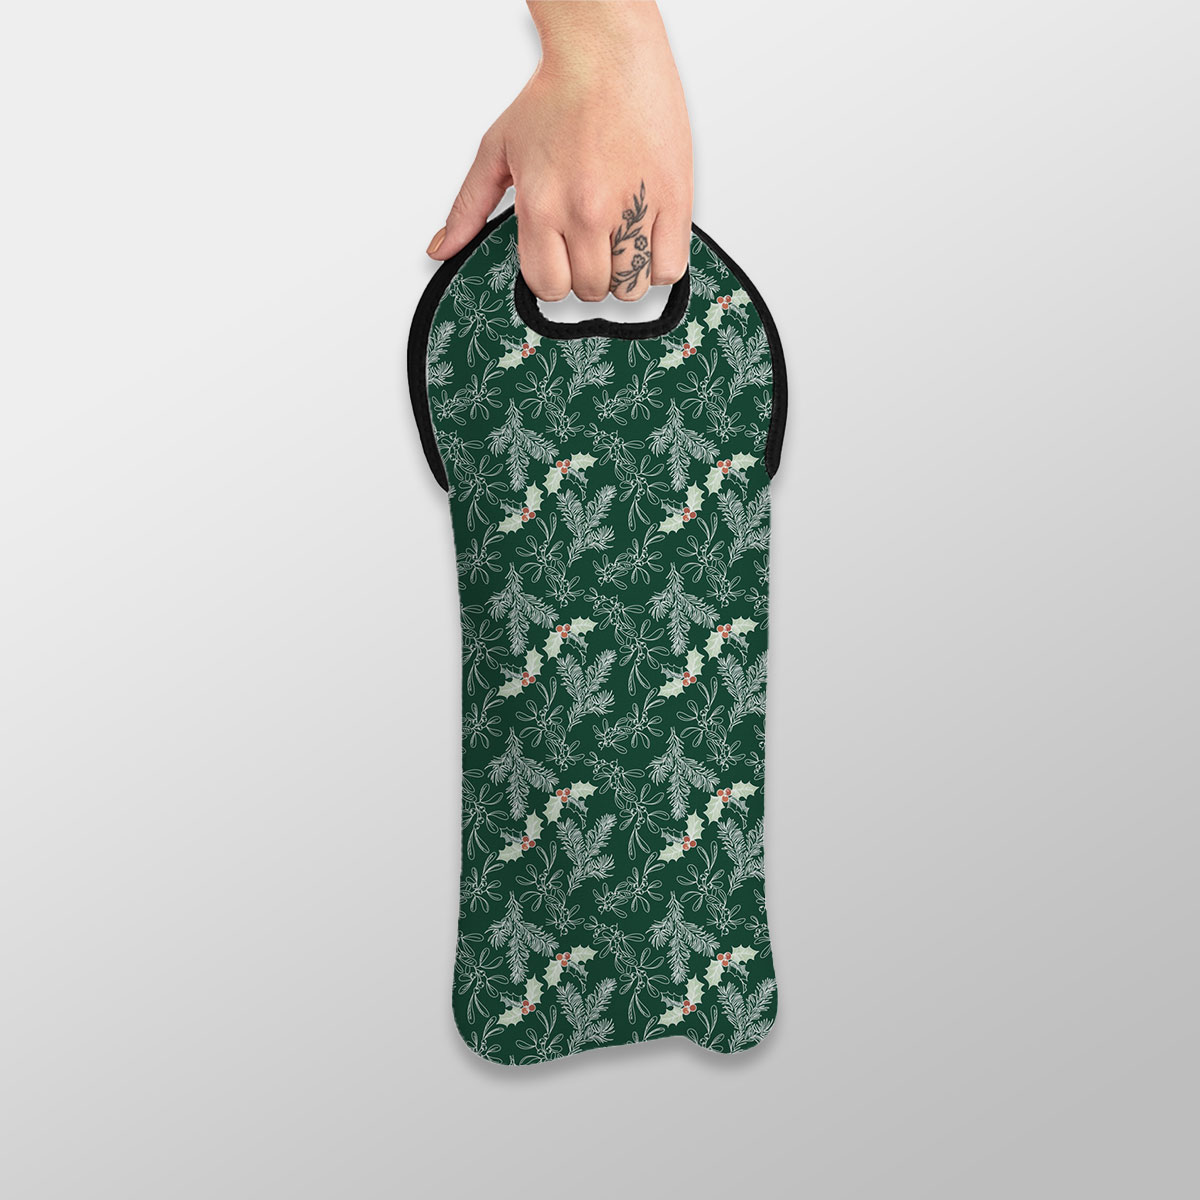 Holly Leaf, Christmas Mistletoe And Pine Tree Branche Wine Tote Bag